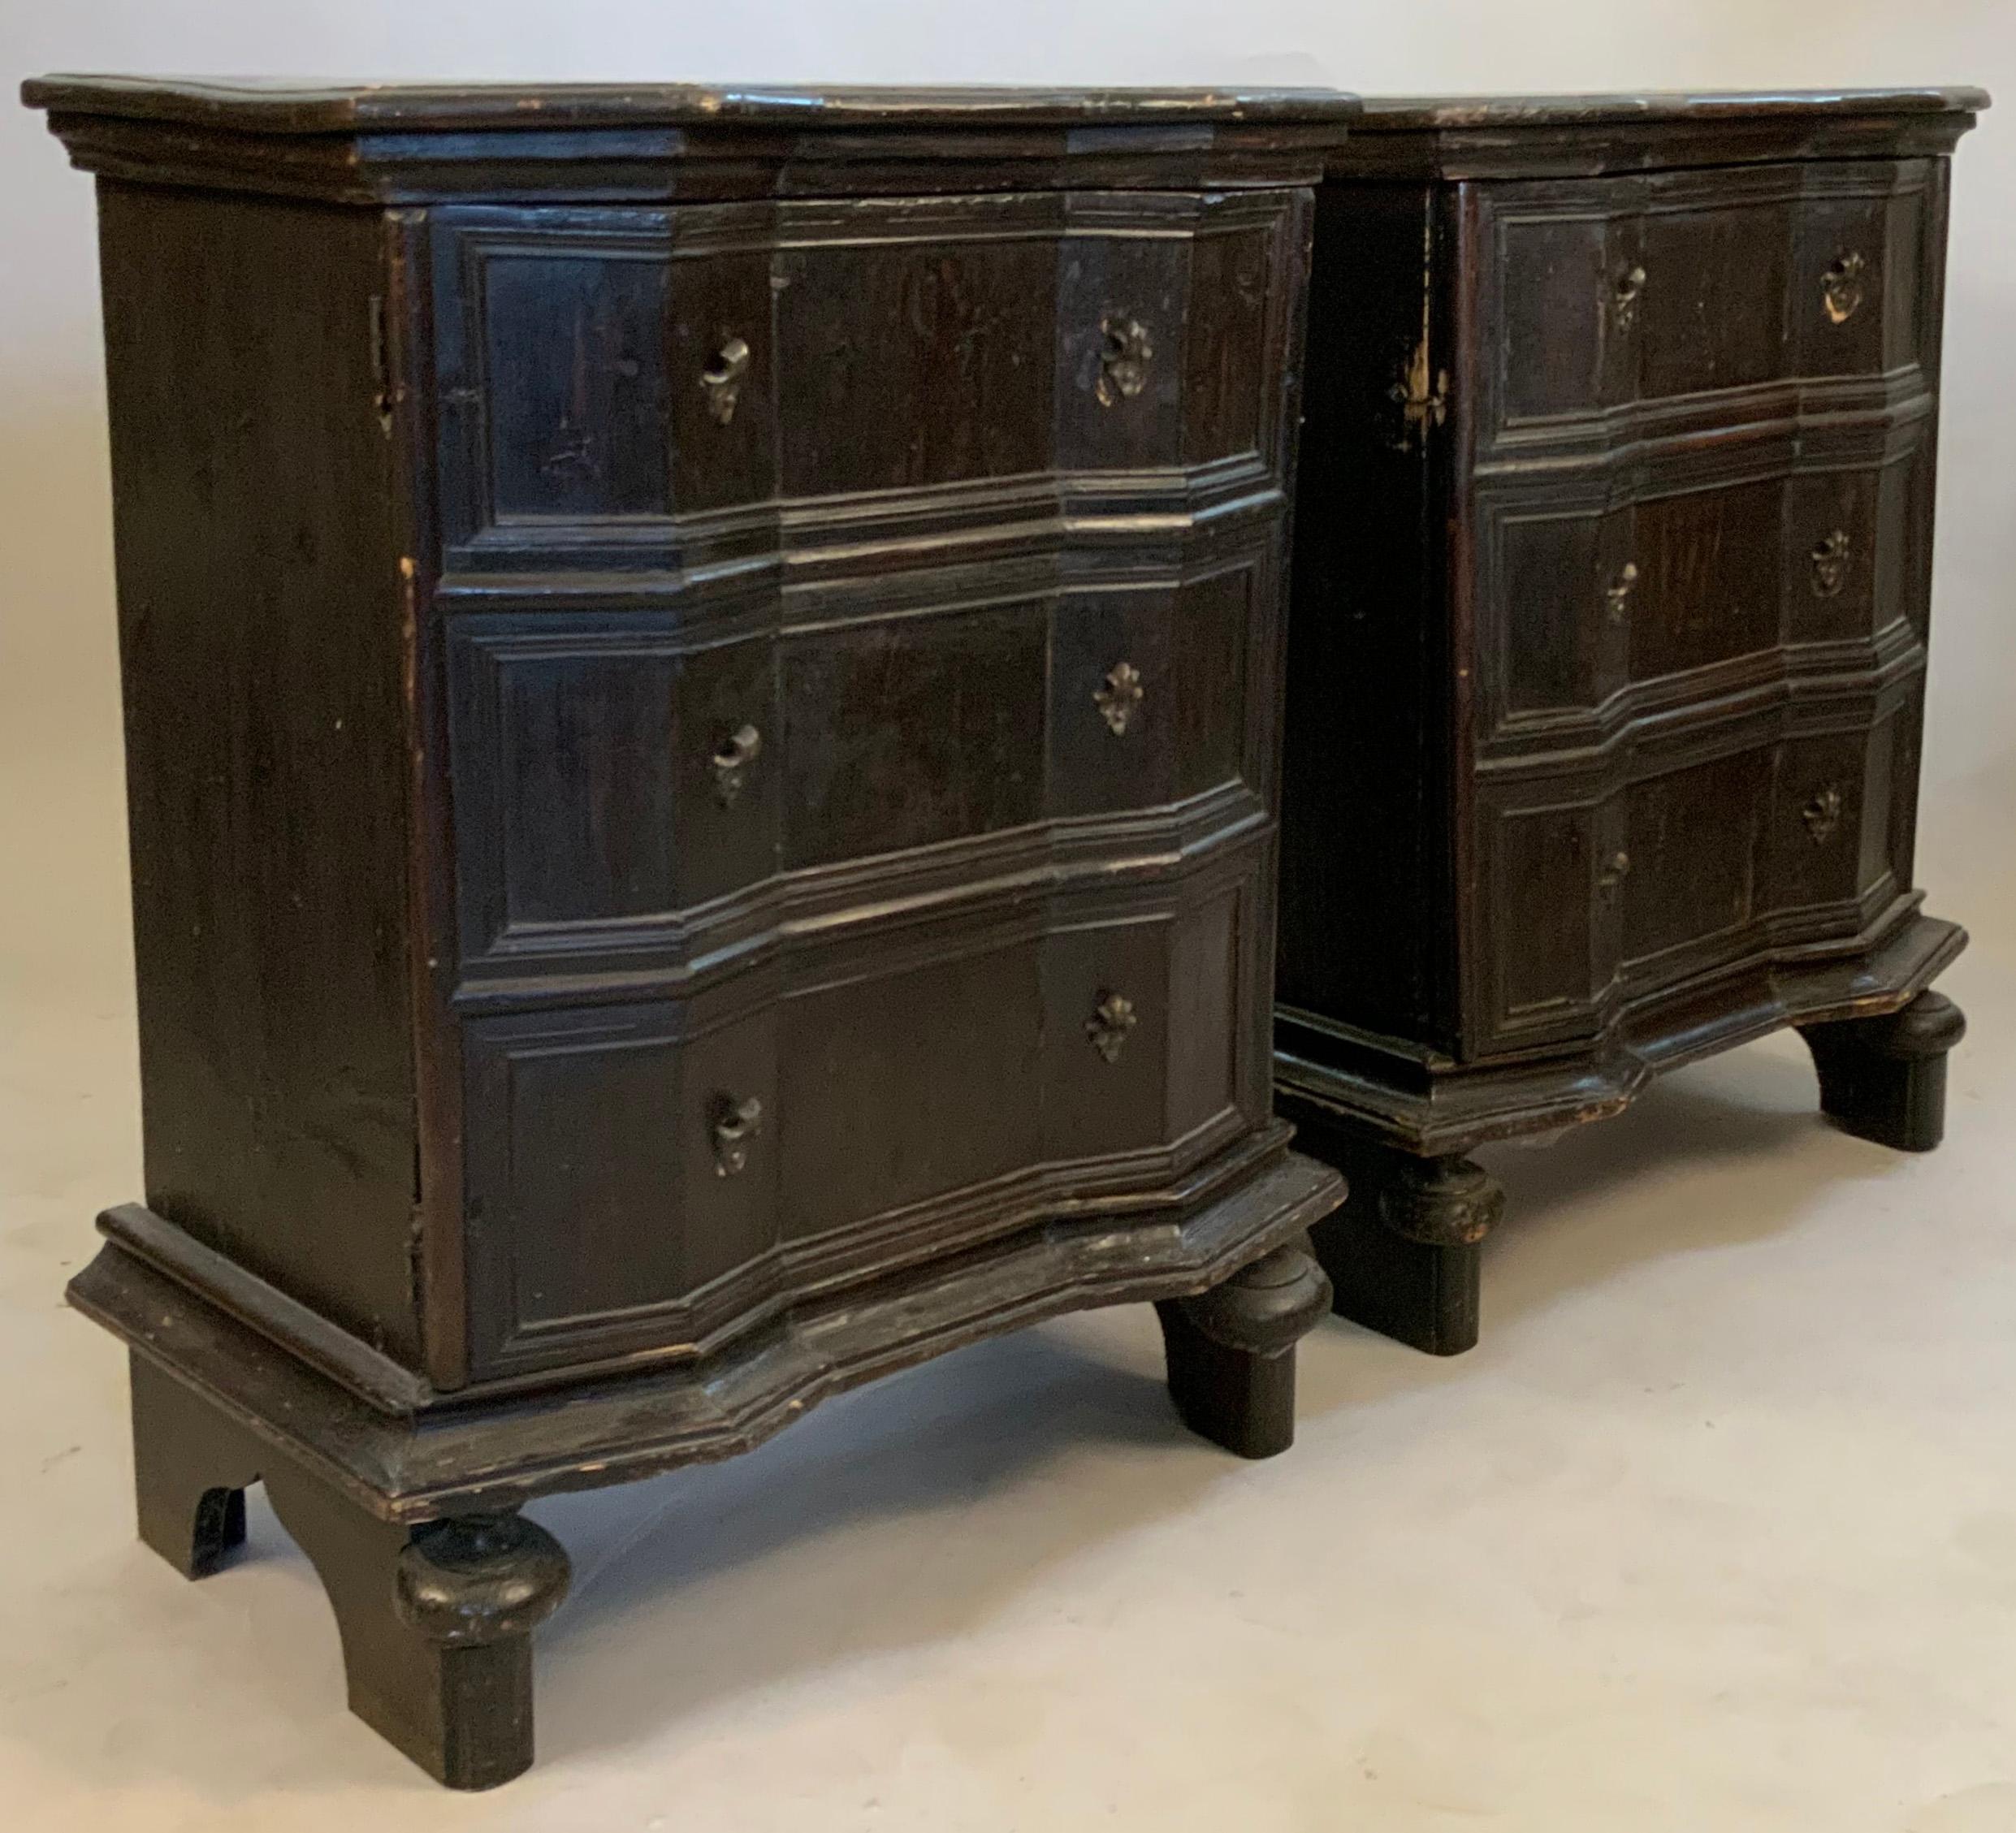 A very interesting and unique pair of late 19th century cabinets, with single doors made to appear as three drawer fronts. interiors fitted with shelves and covered with antique paper covering. the doors are angled and scalloped, and the cases are